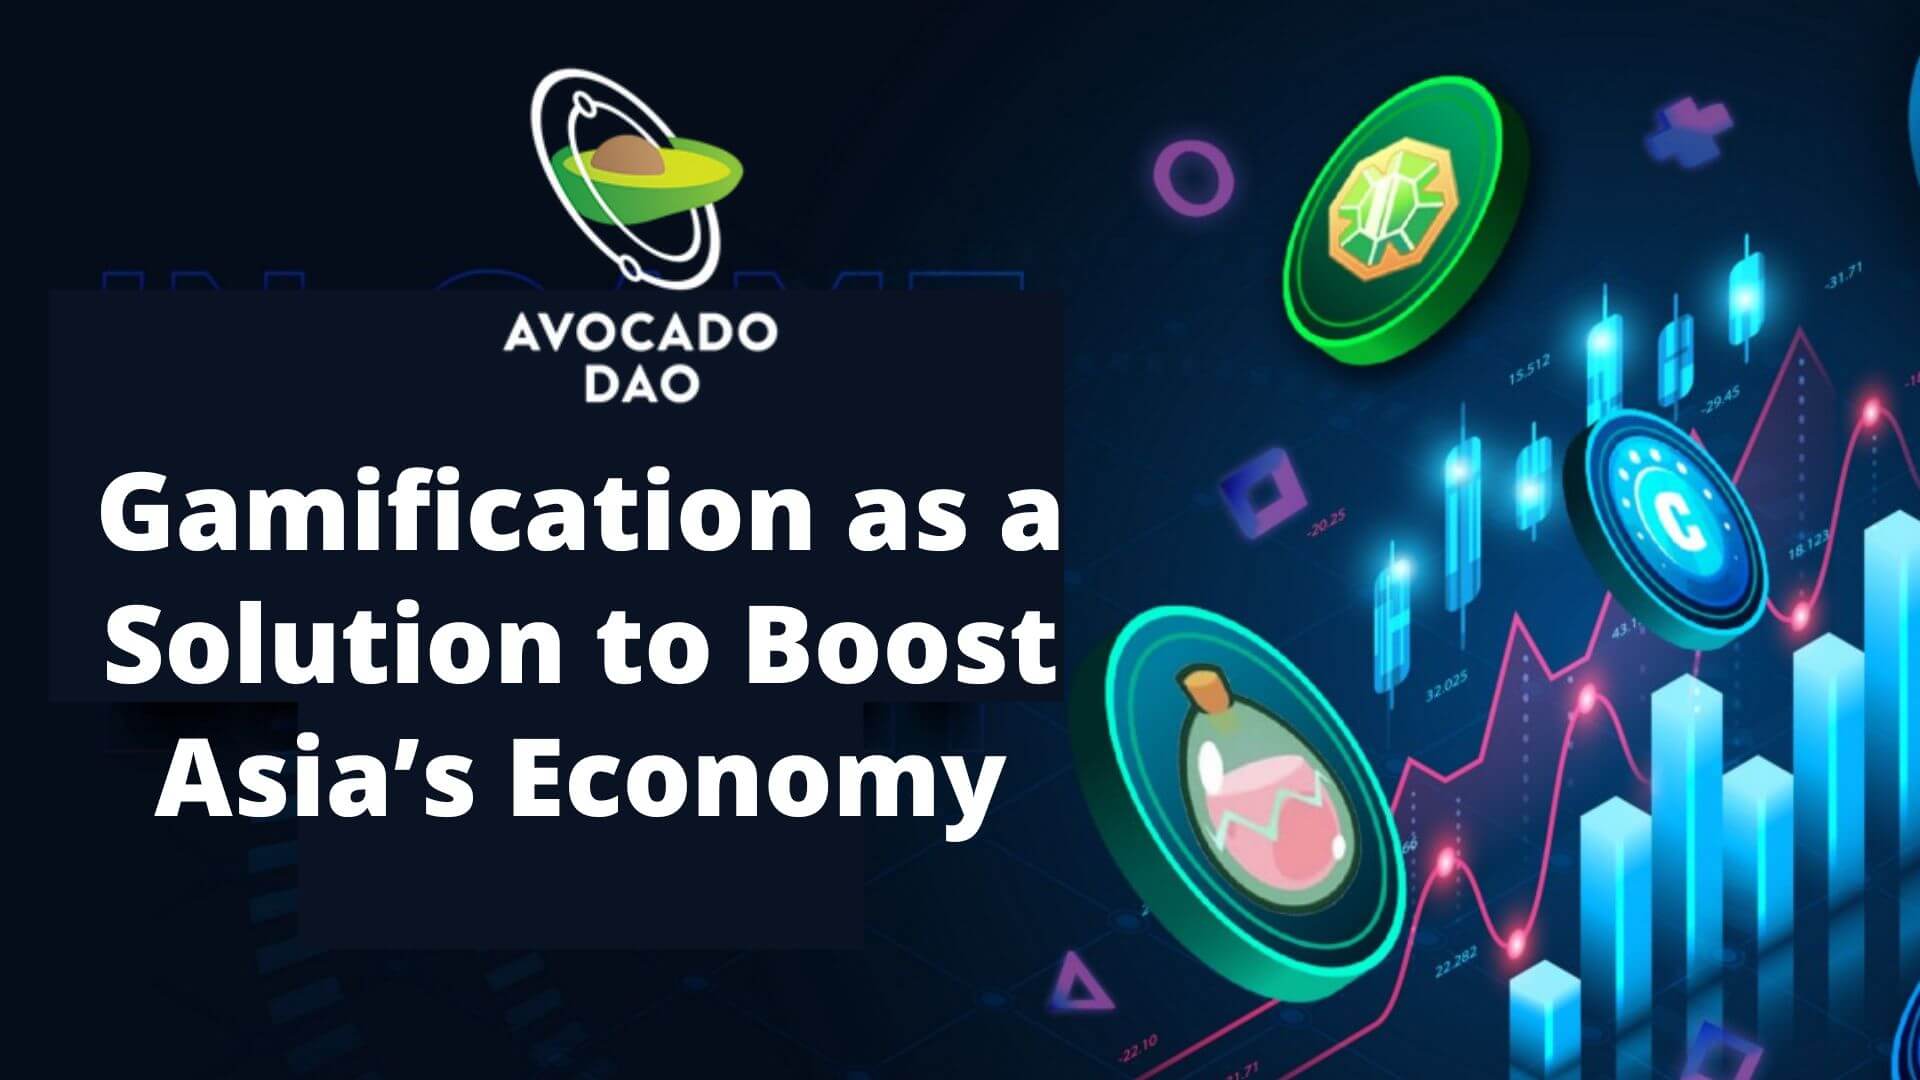 Gamification as a solution to boost Asia’s economy